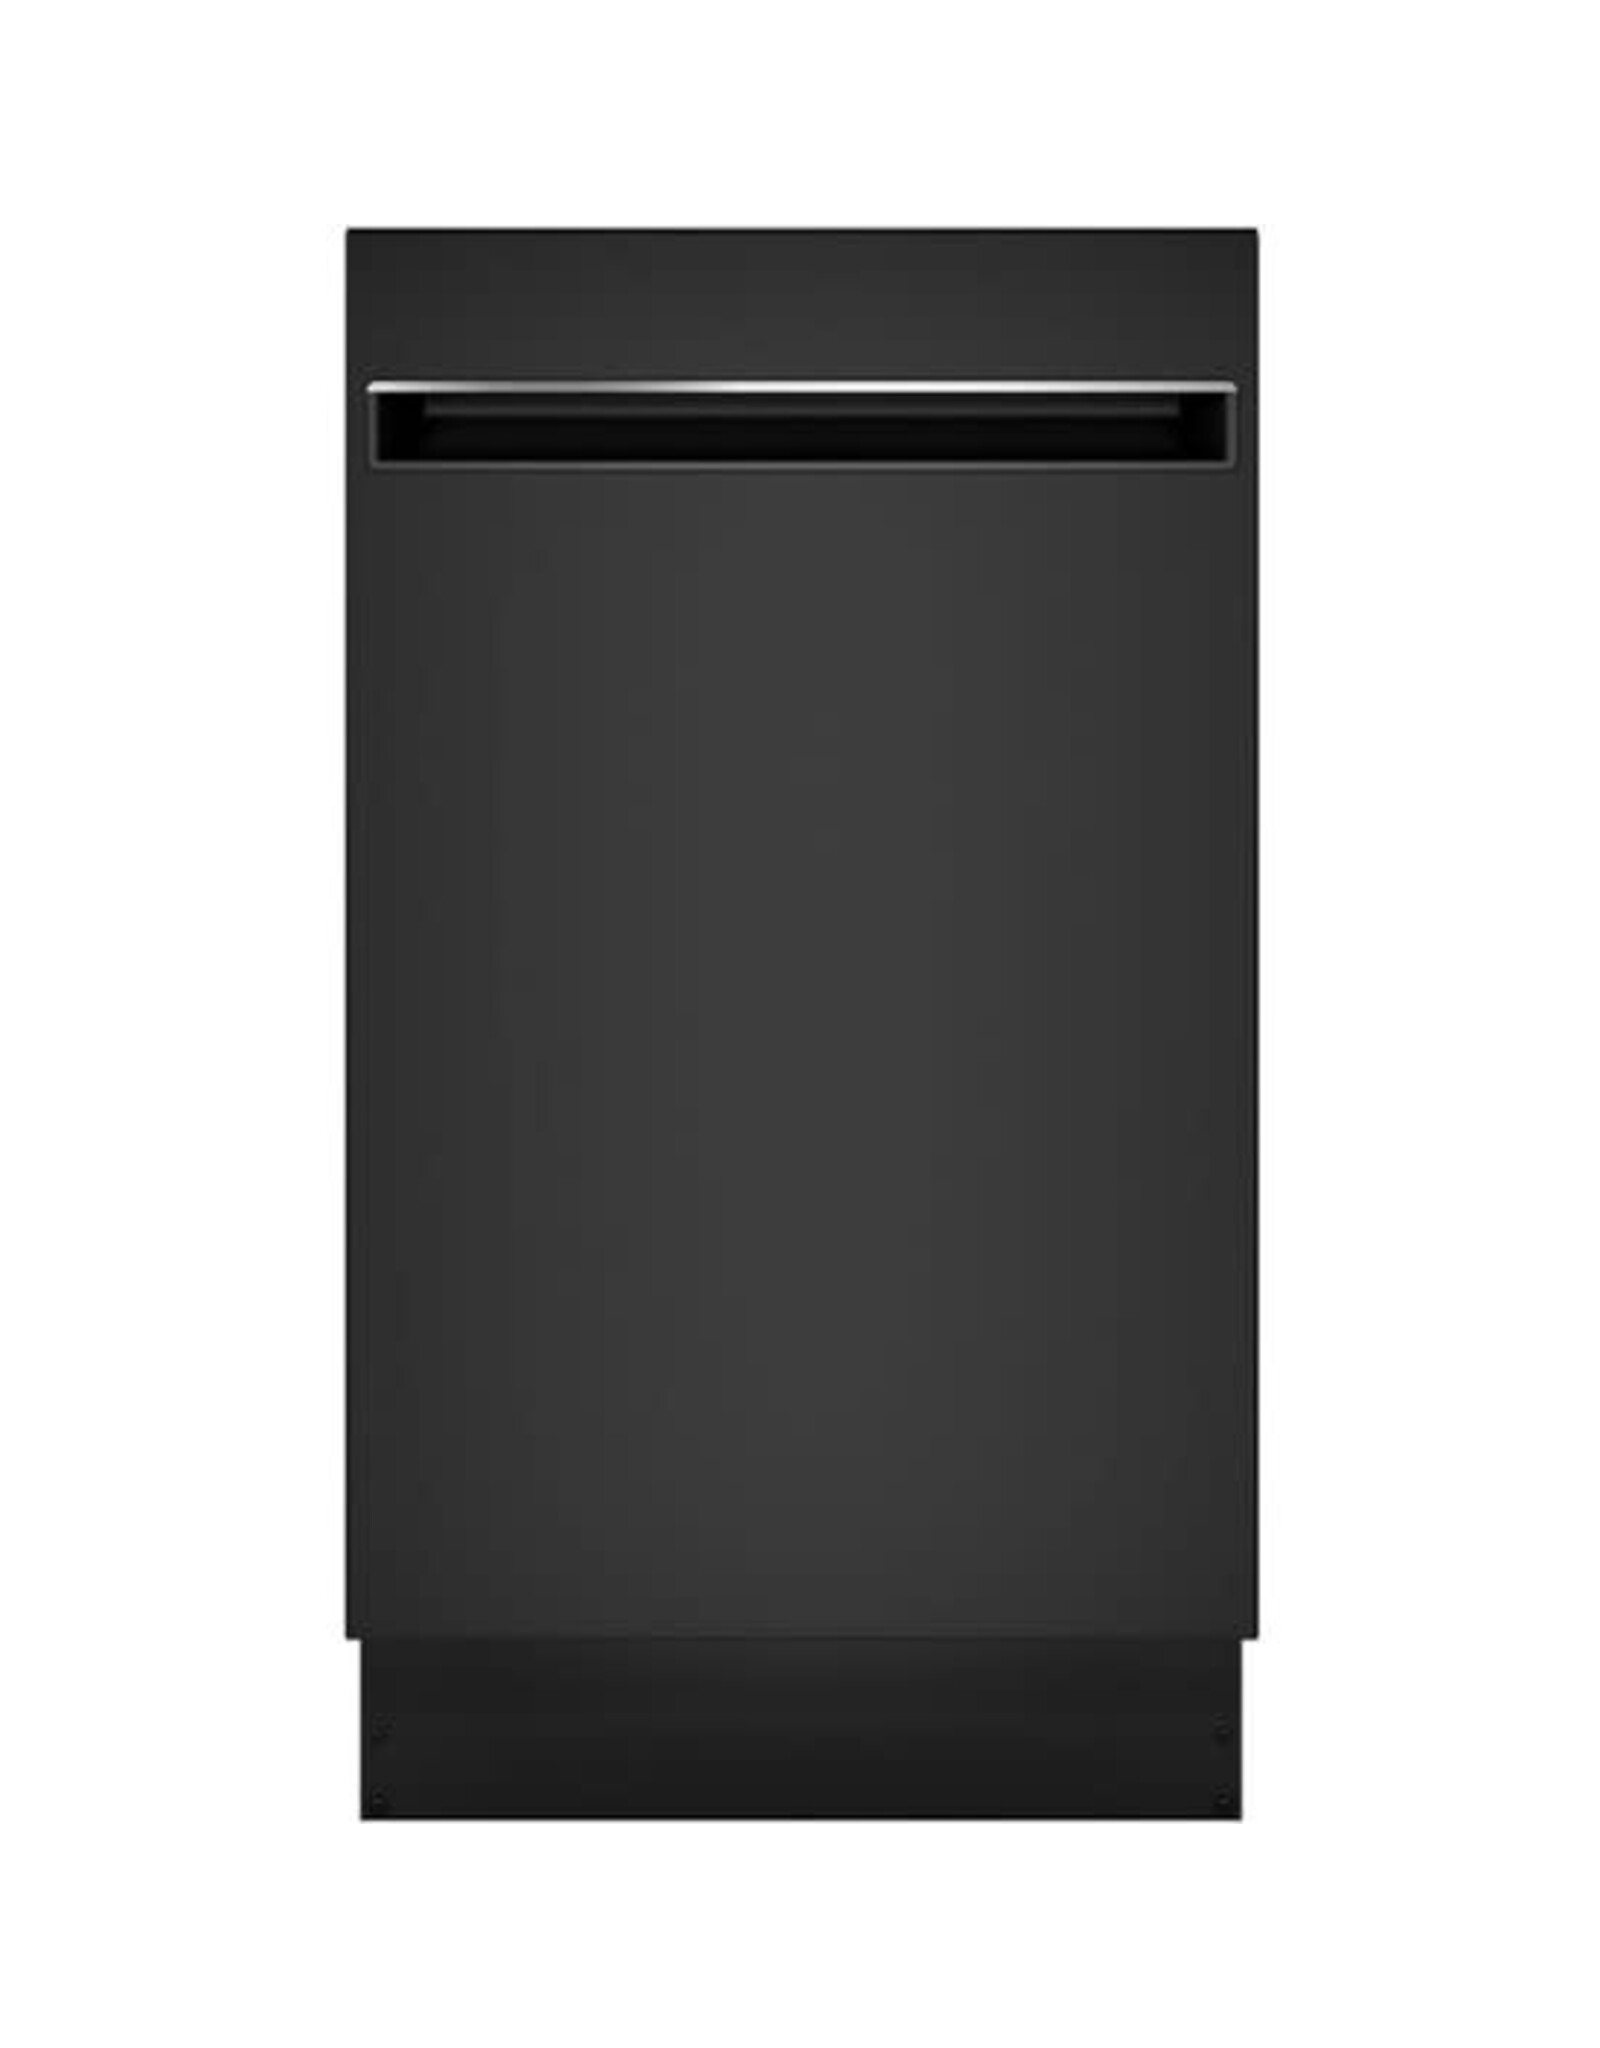 GE PROFILE PDT145SGLBB Profile 18 in. Top Control ADA Dishwasher in Black with Stainless Steel Tub and 47 dBA